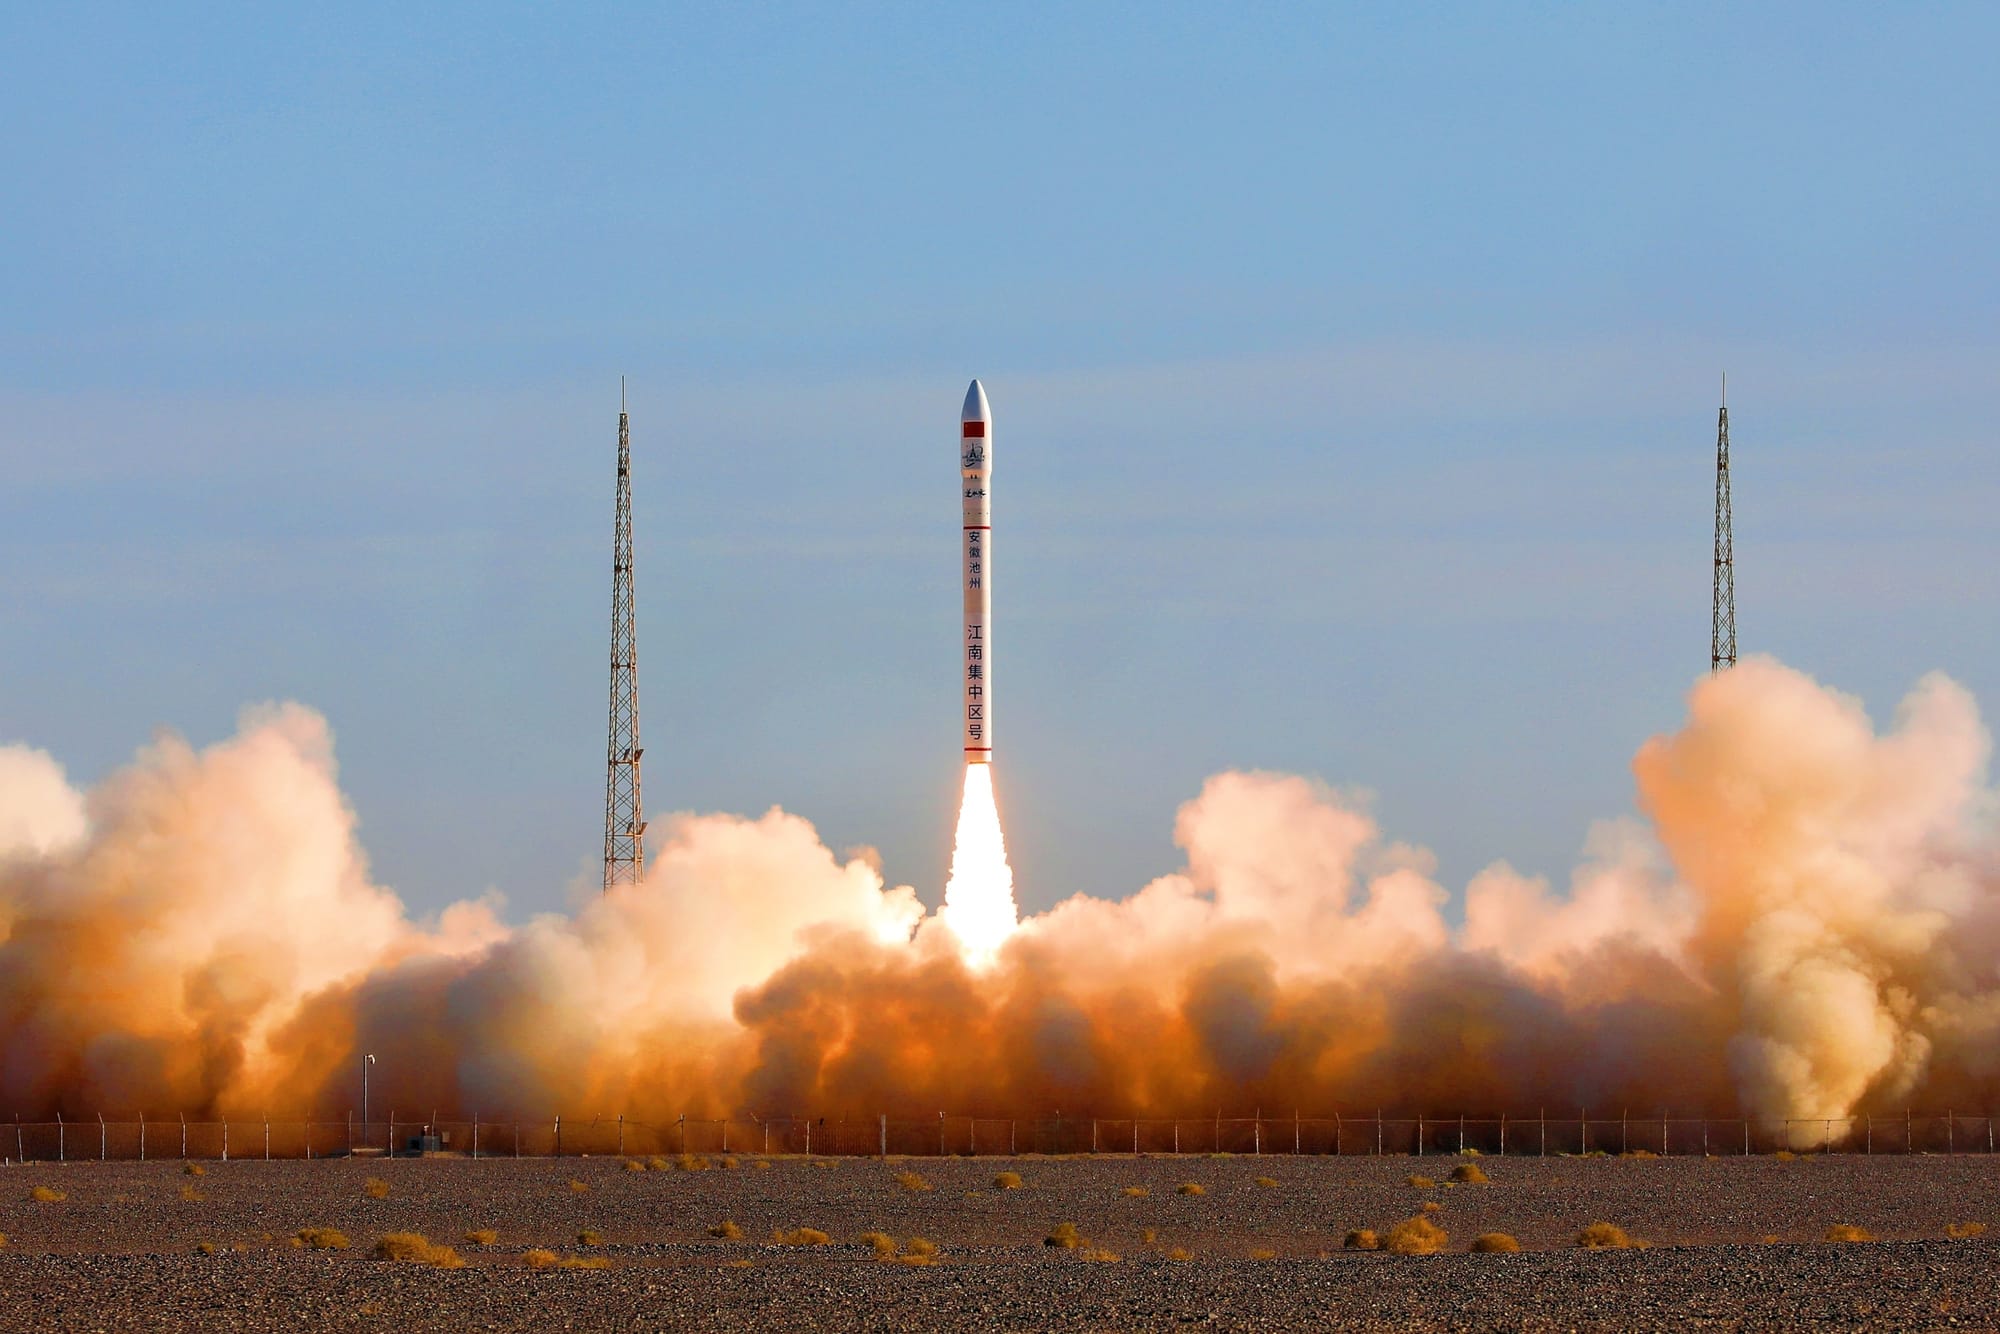 Ceres-1 Y12 lifting off from the Jiuquan Satellite Launch Center.